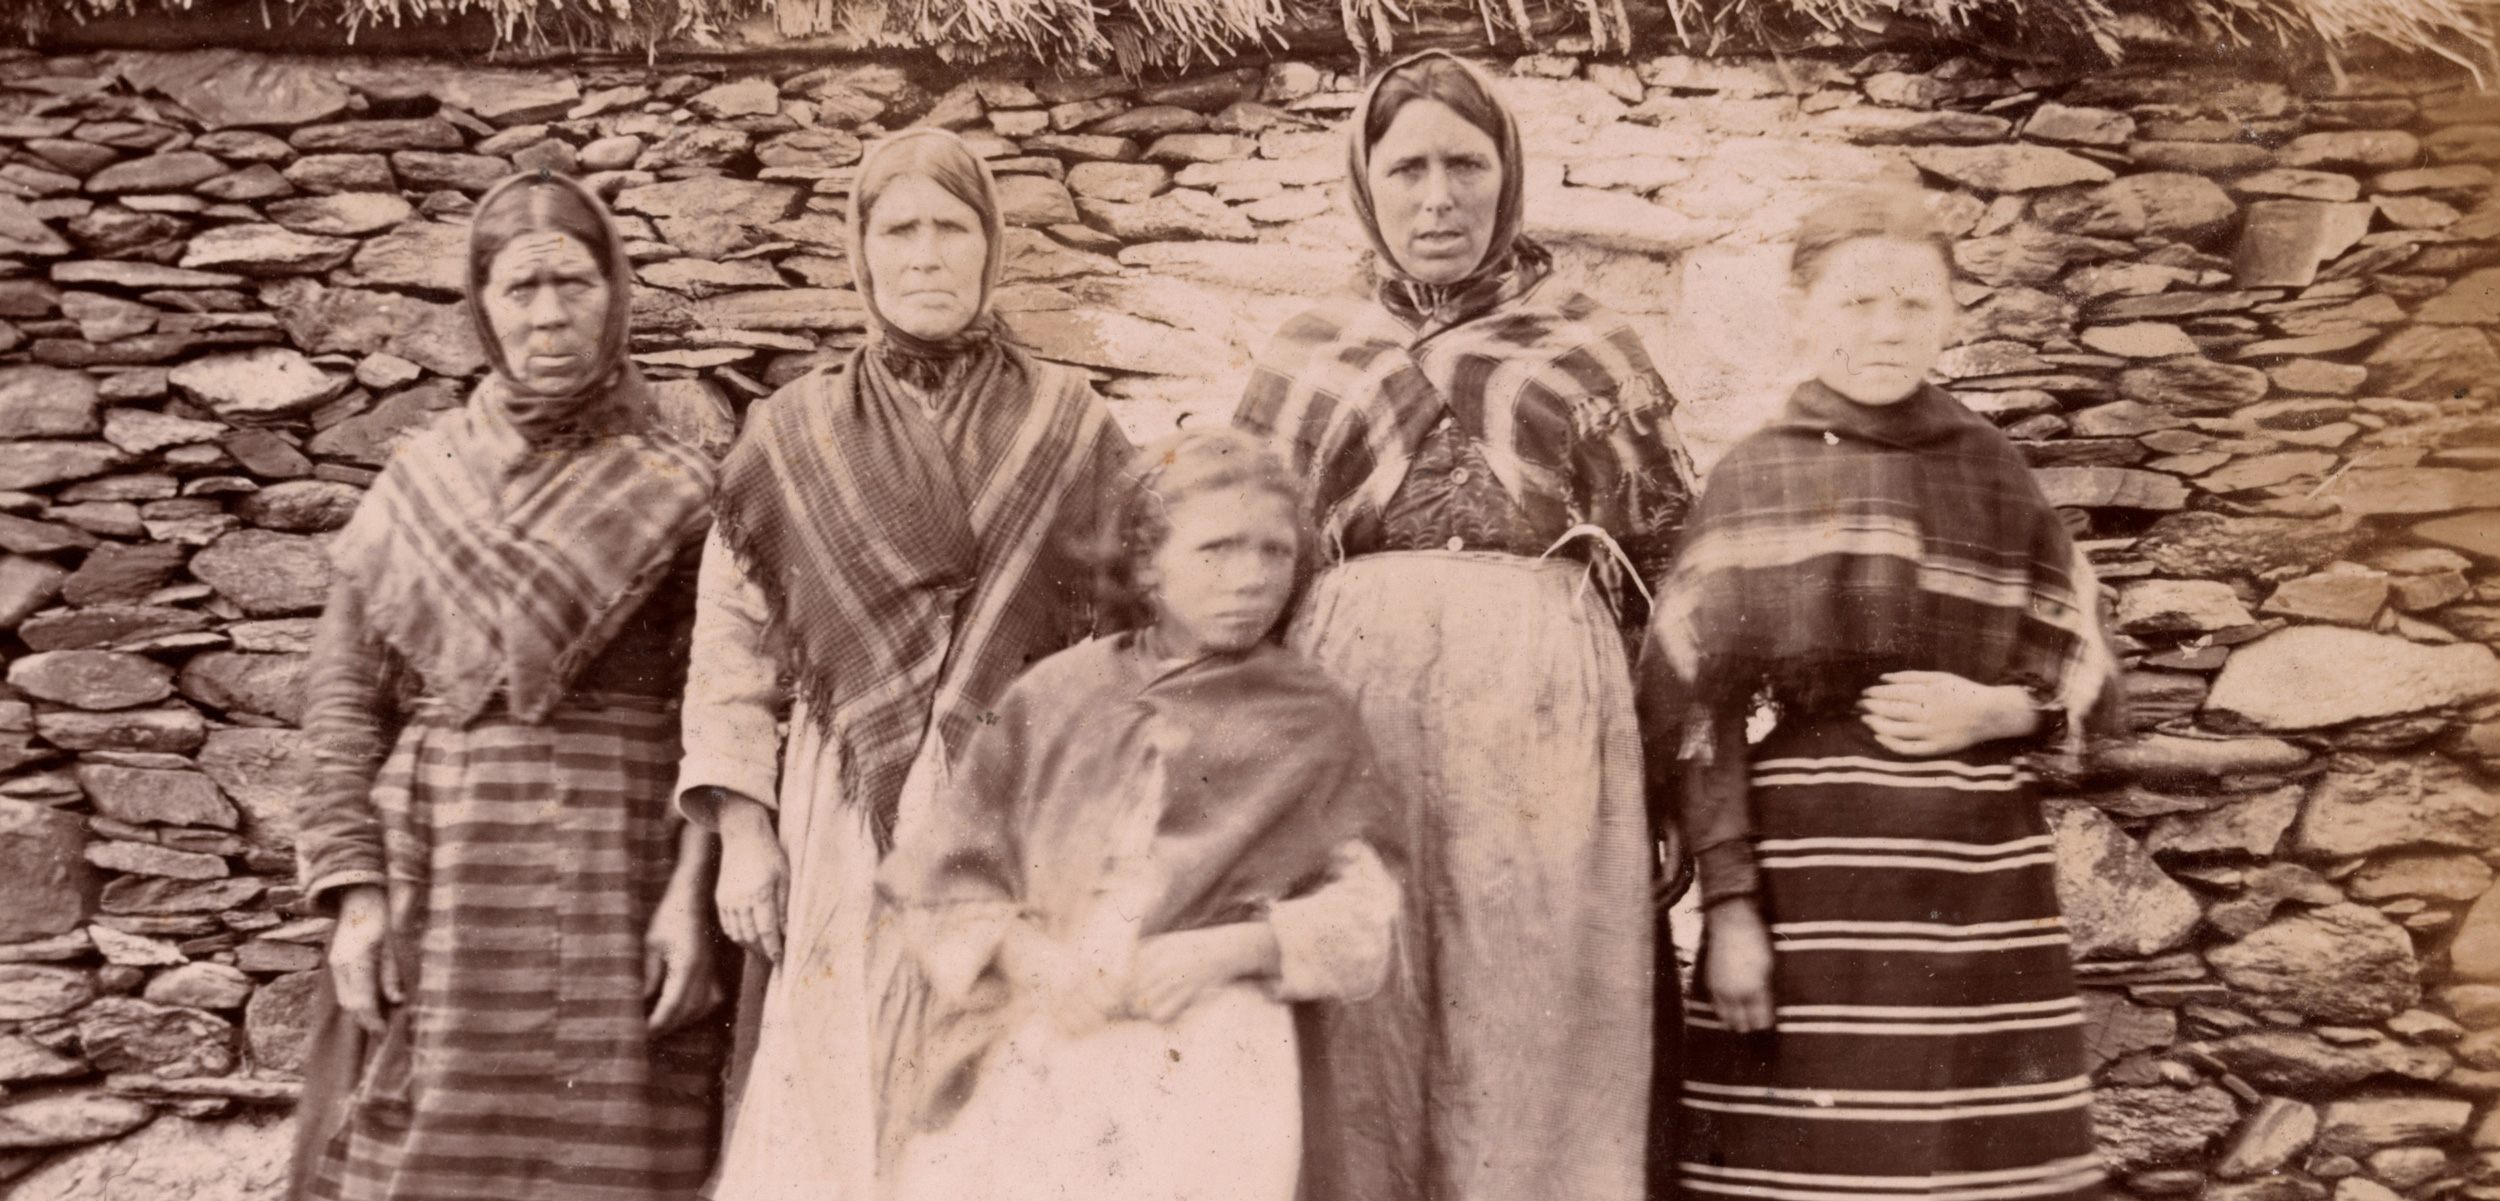 After surviving starvation on the Irish island of Inishbofin, the women and children of the Halloran family never abandoned hope for a better future. Photo courtesy of Trinity College Library Dublin